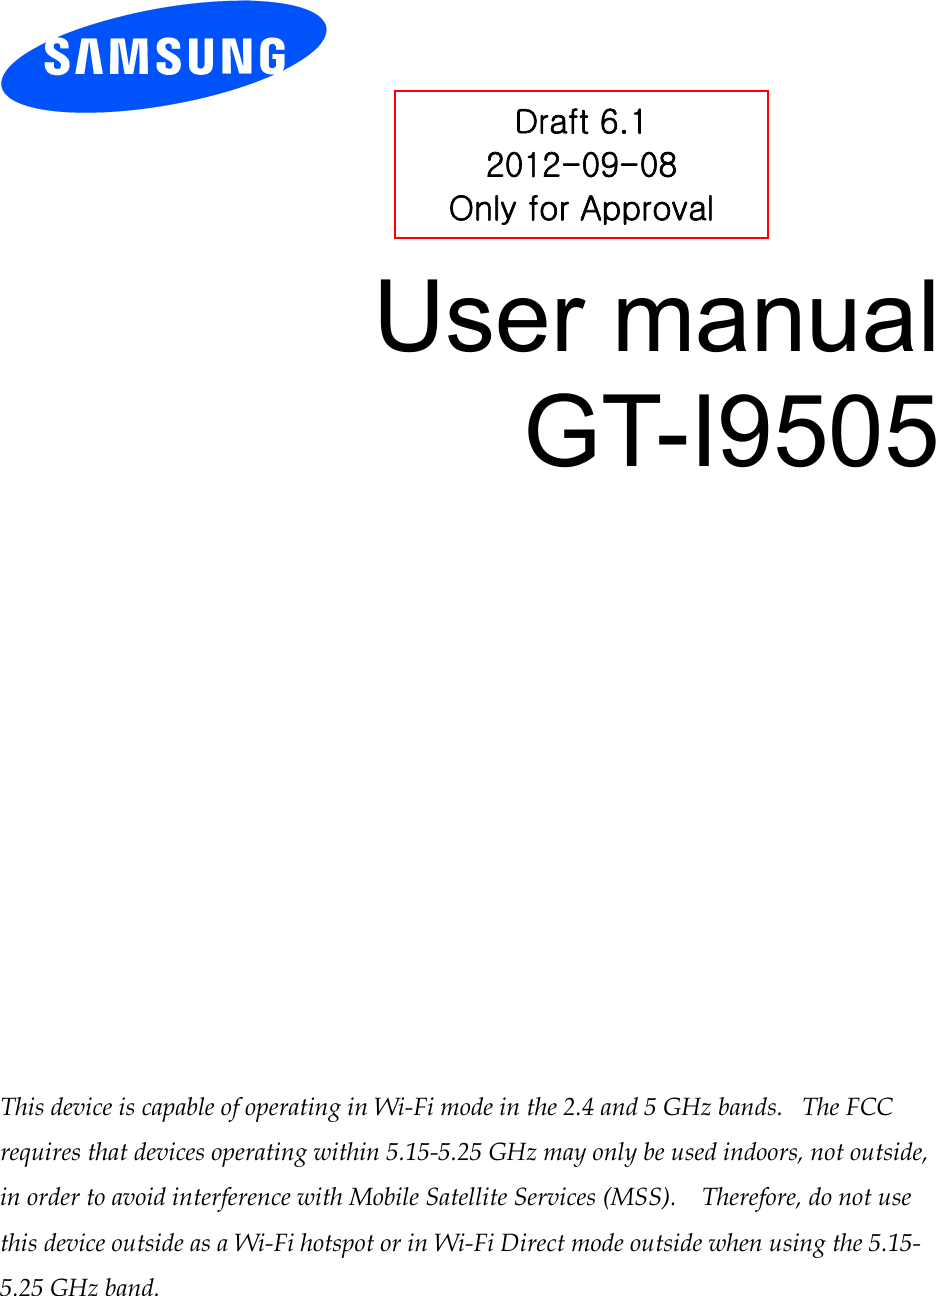          User manual GT-I9505                 This device is capable of operating in Wi-Fi mode in the 2.4 and 5 GHz bands.   The FCC requires that devices operating within 5.15-5.25 GHz may only be used indoors, not outside, in order to avoid interference with Mobile Satellite Services (MSS).    Therefore, do not use this device outside as a Wi-Fi hotspot or in Wi-Fi Direct mode outside when using the 5.15-5.25 GHz band.  Draft 6.1 2012-09-08 Only for Approval 